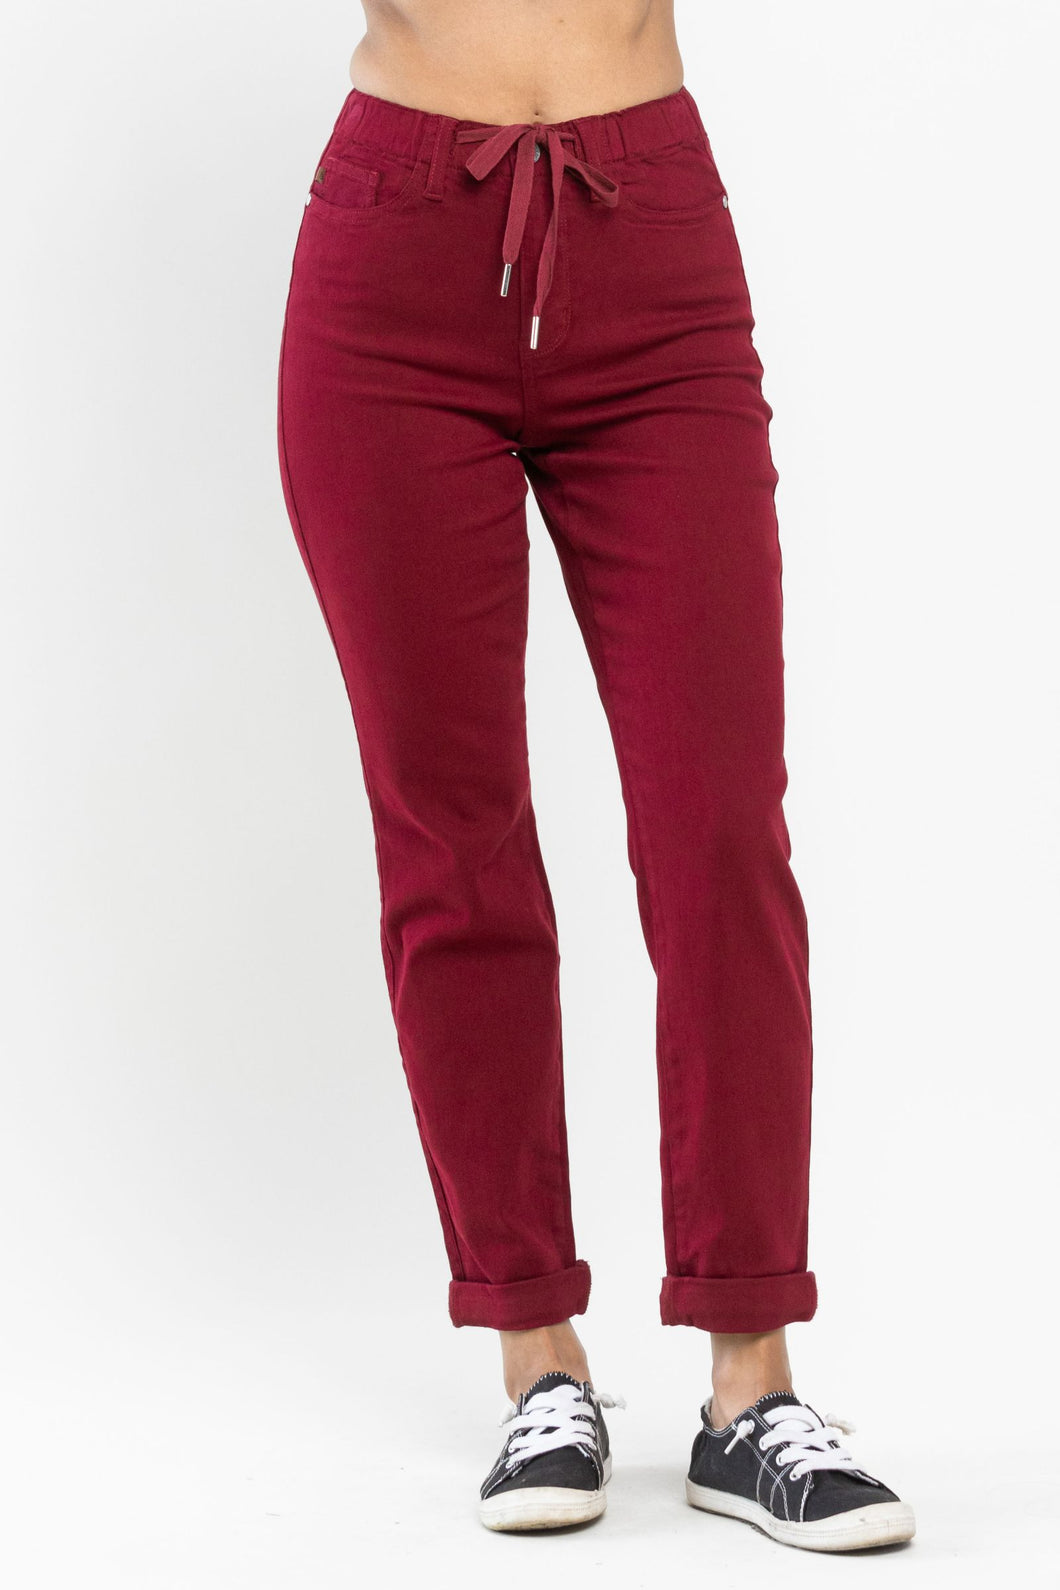 JUDY BLUE Scarlet Pull On Jogger Jeans